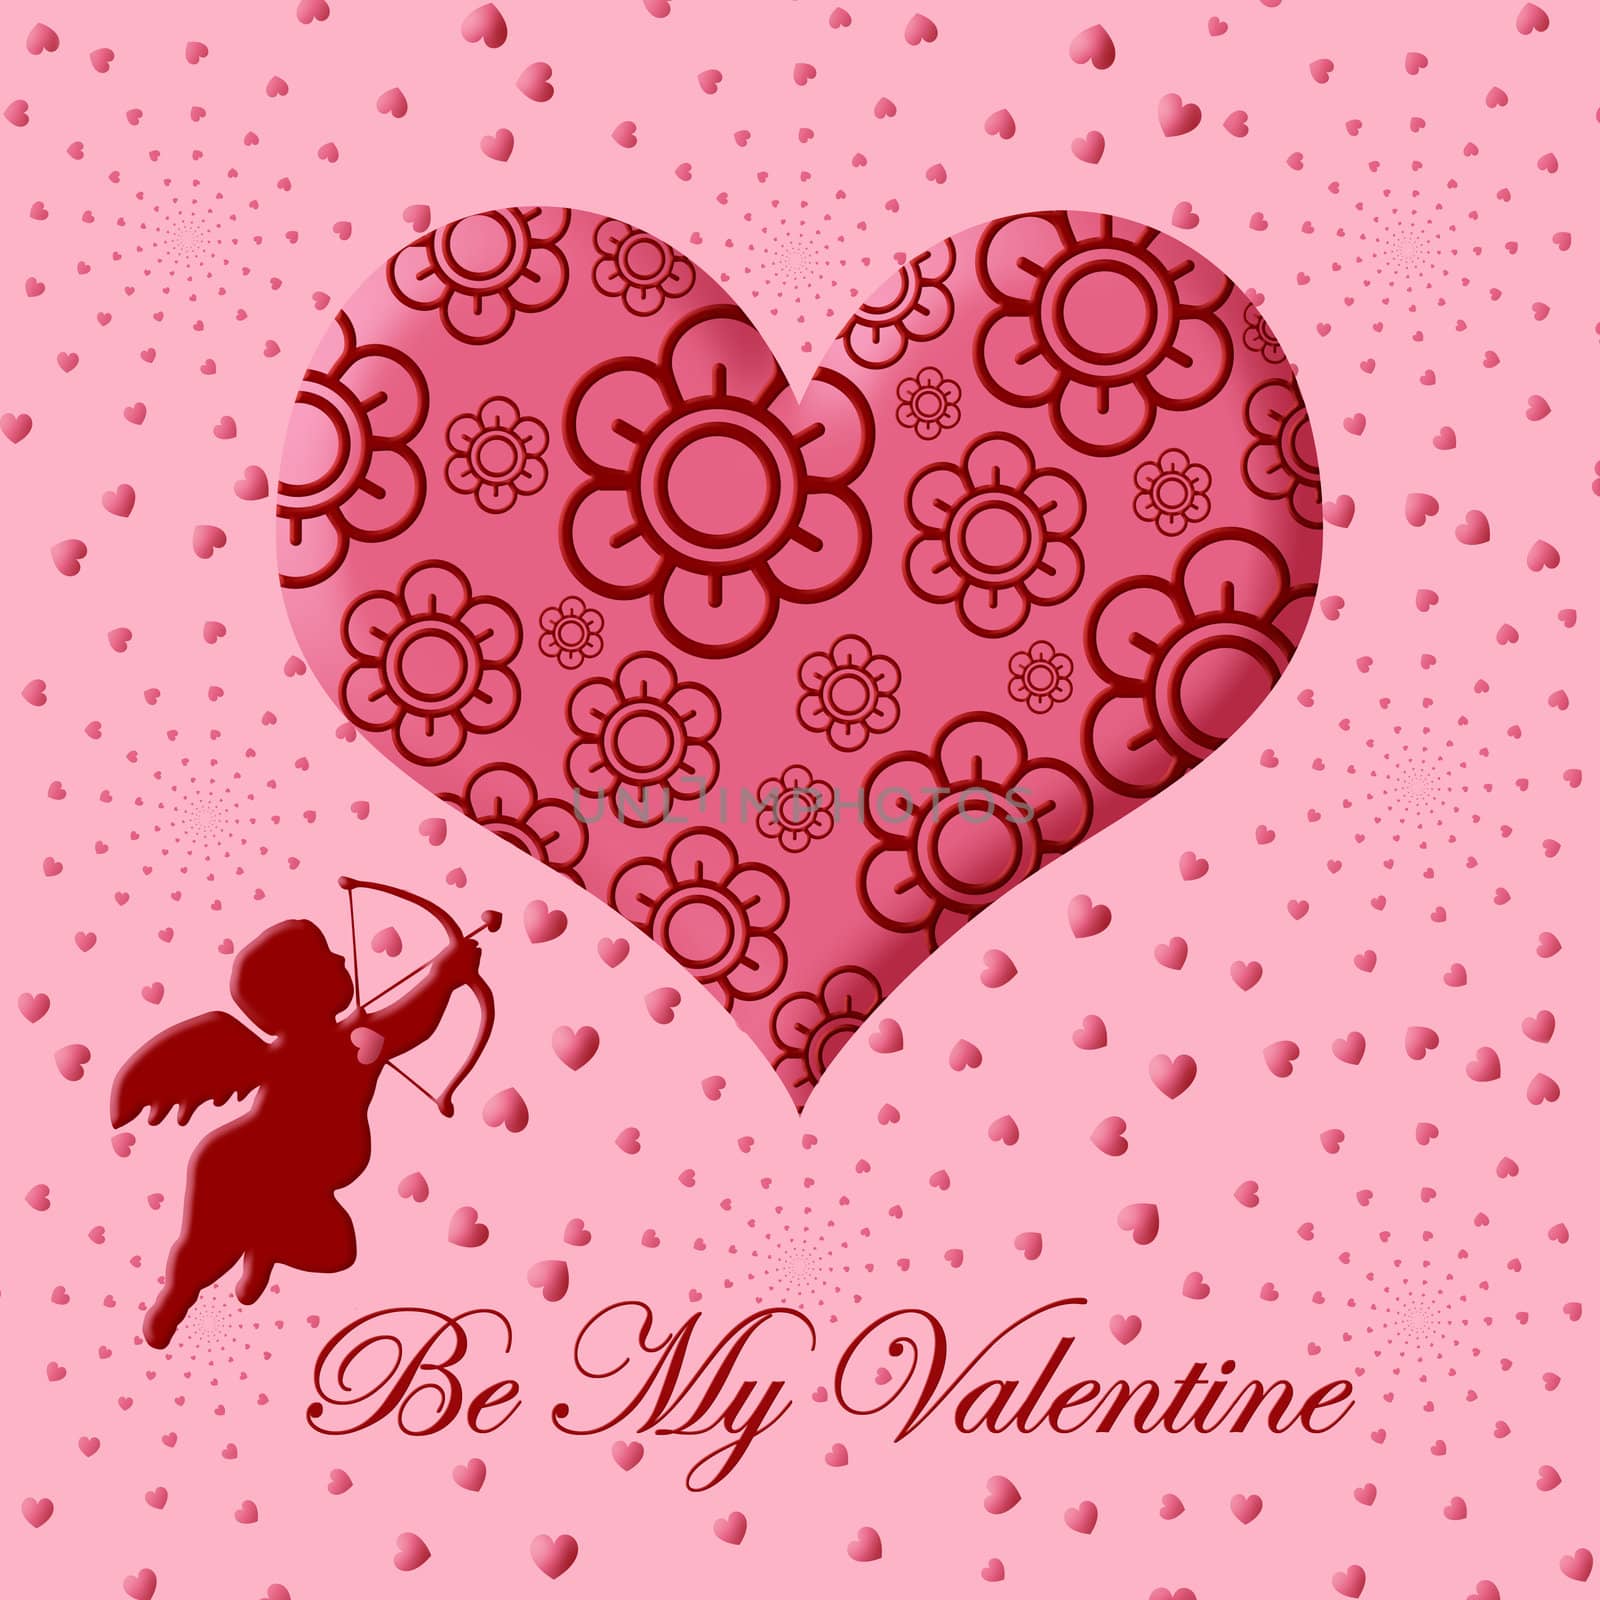 Valentine's Day Cupid with Bow and Arrow Floral Pink Heart